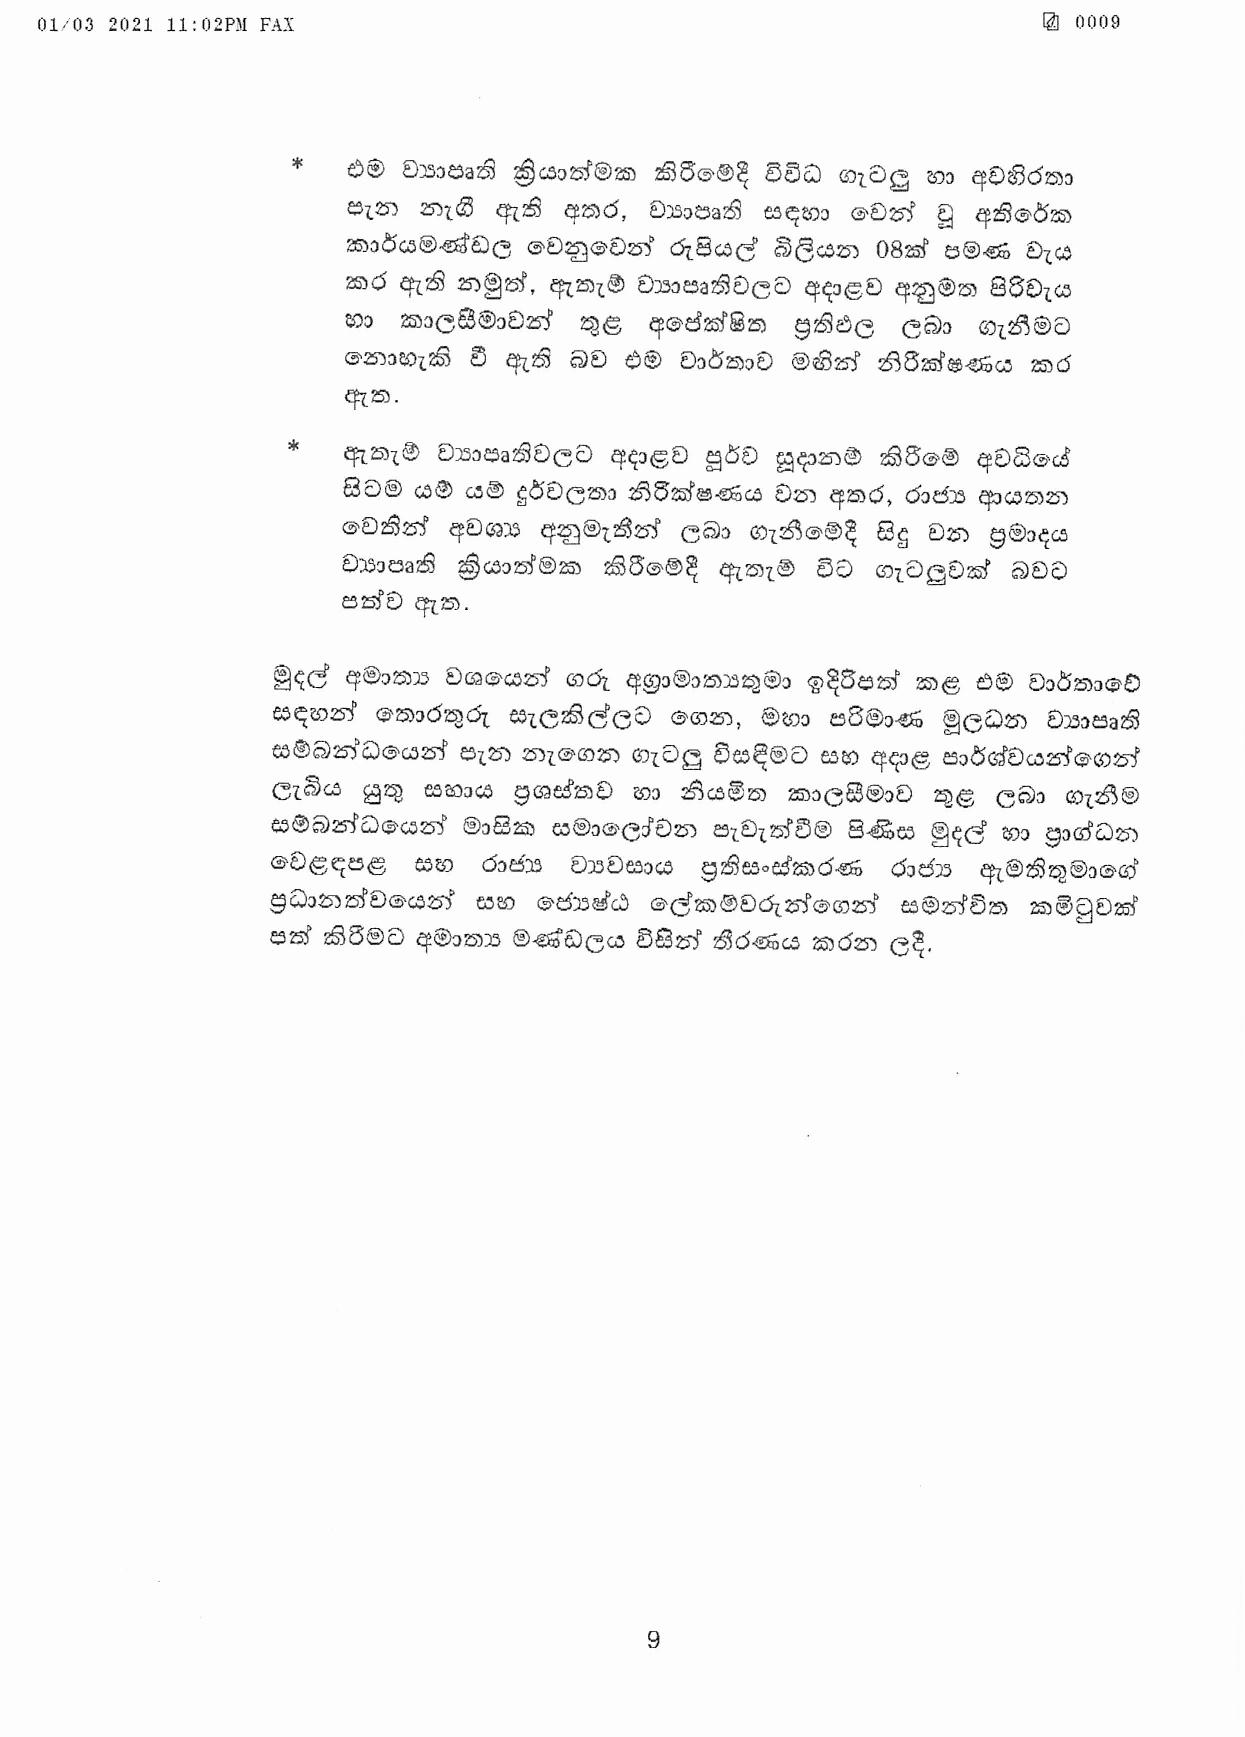 Cabinet Decision on 01.03.2021 page 009